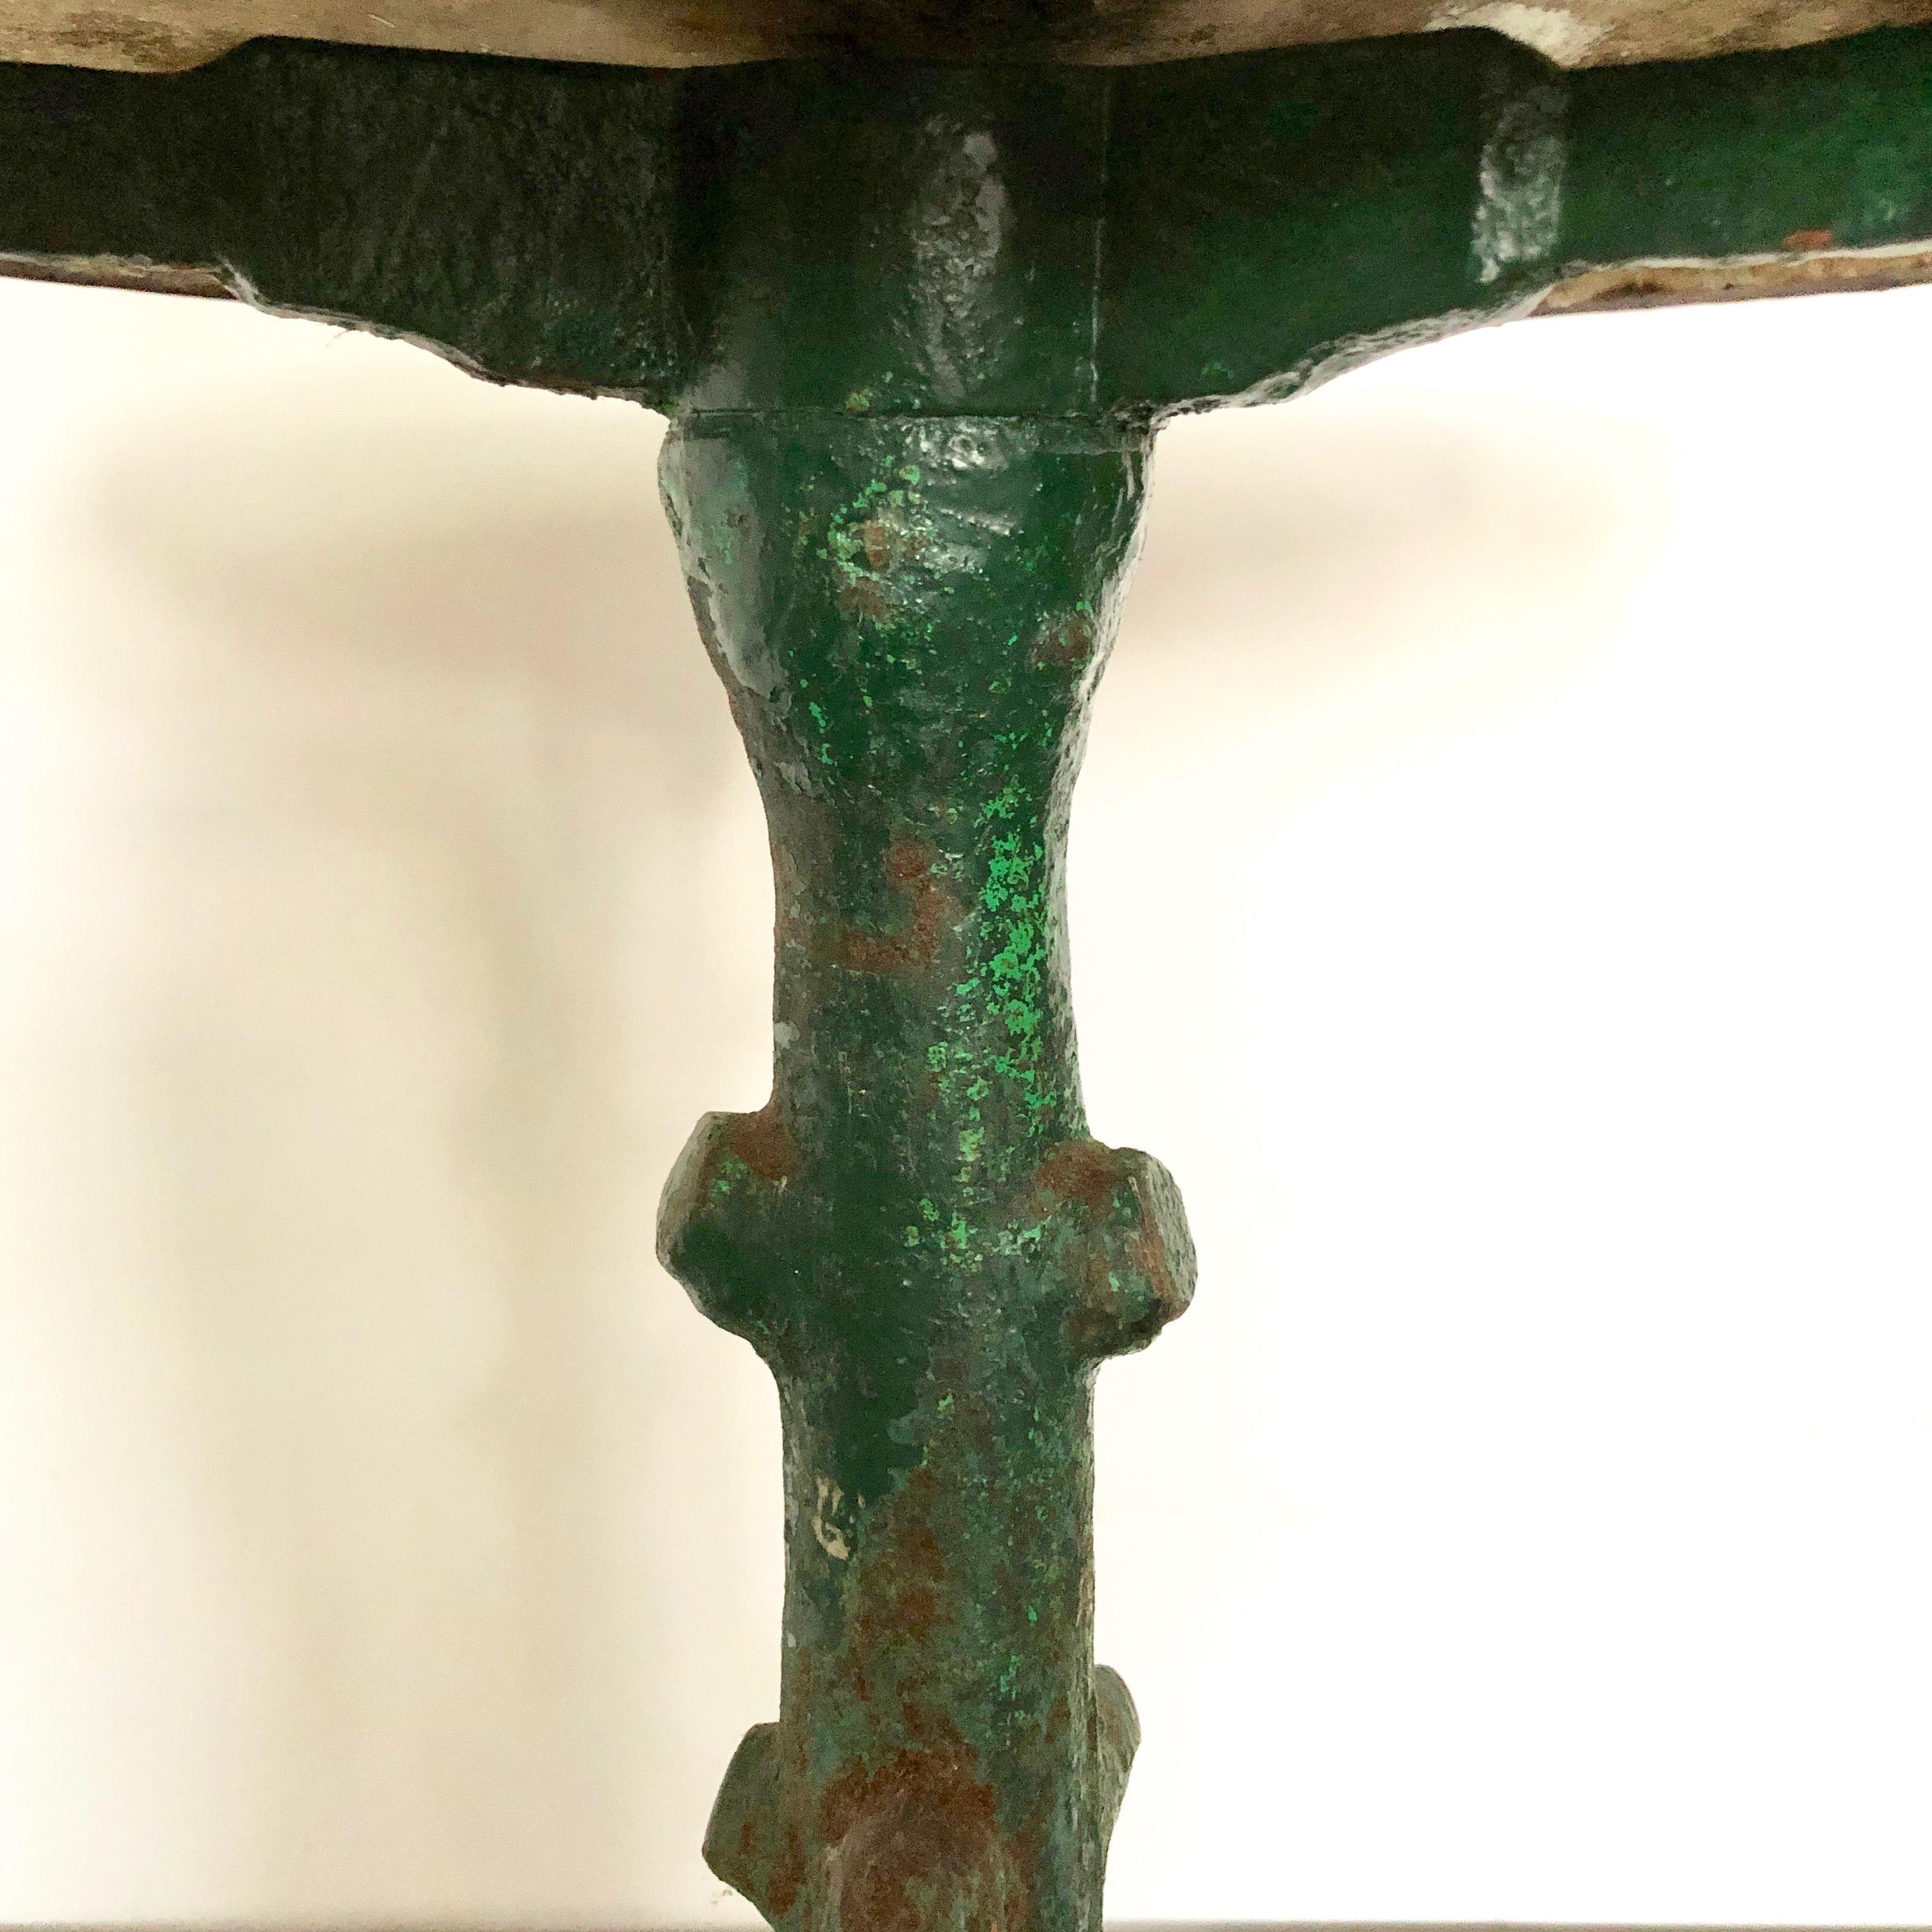 Charming small 19th century French iron Bistro table with well weathered marble and brass trim.
Perfect size for your little garden or patio.
Here are few examples … surprising pieces and objects, authentic, decorative and rare items that you will